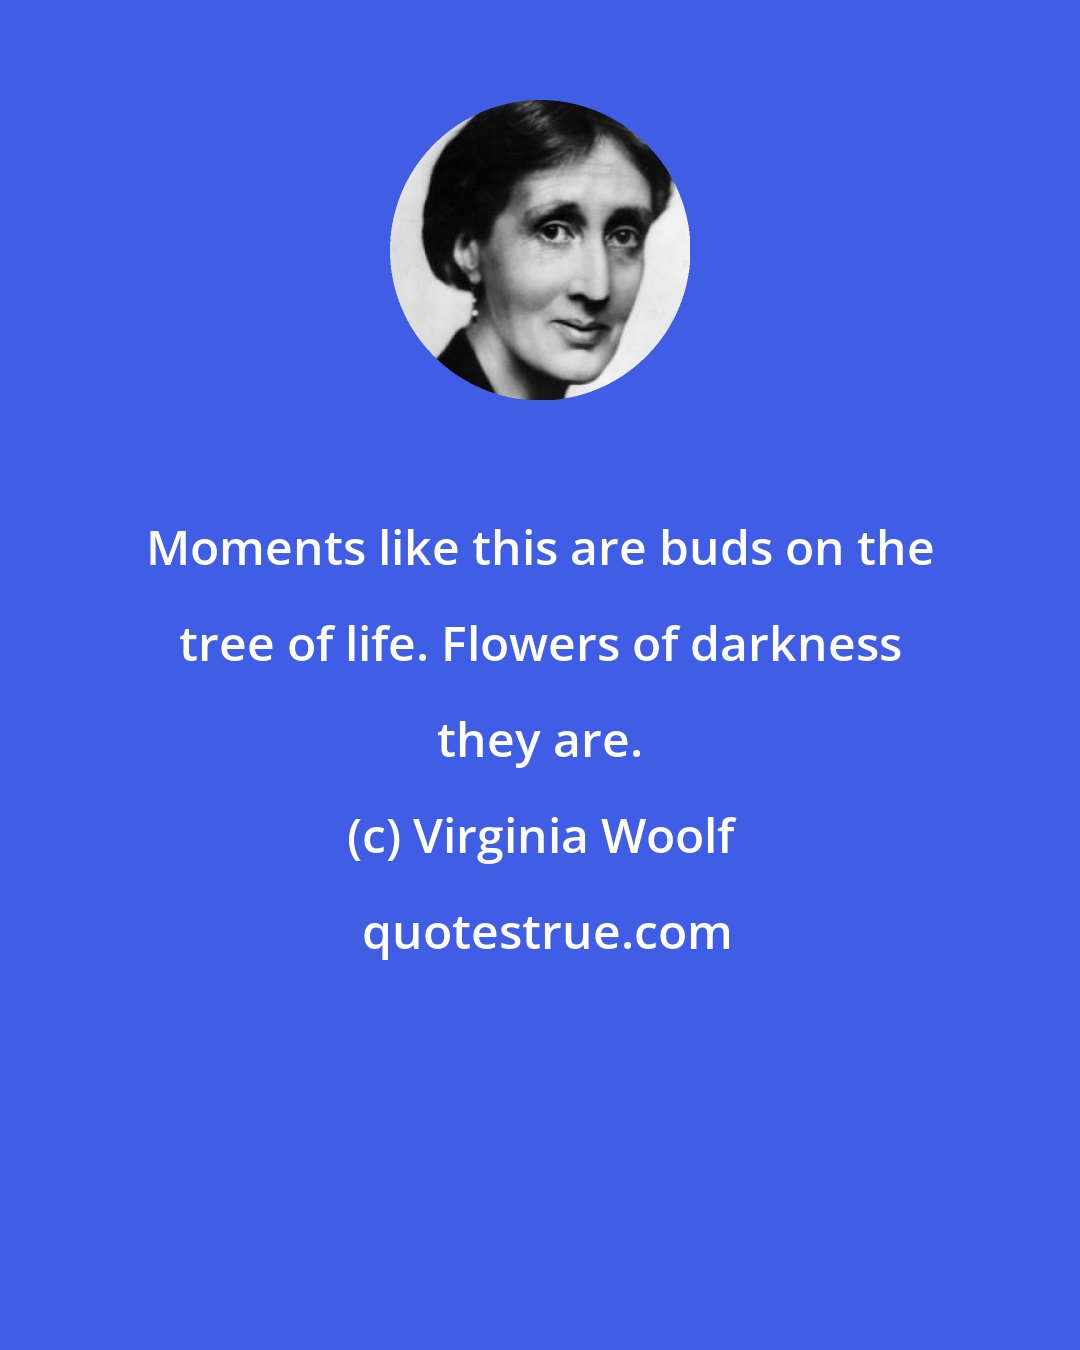 Virginia Woolf: Moments like this are buds on the tree of life. Flowers of darkness they are.